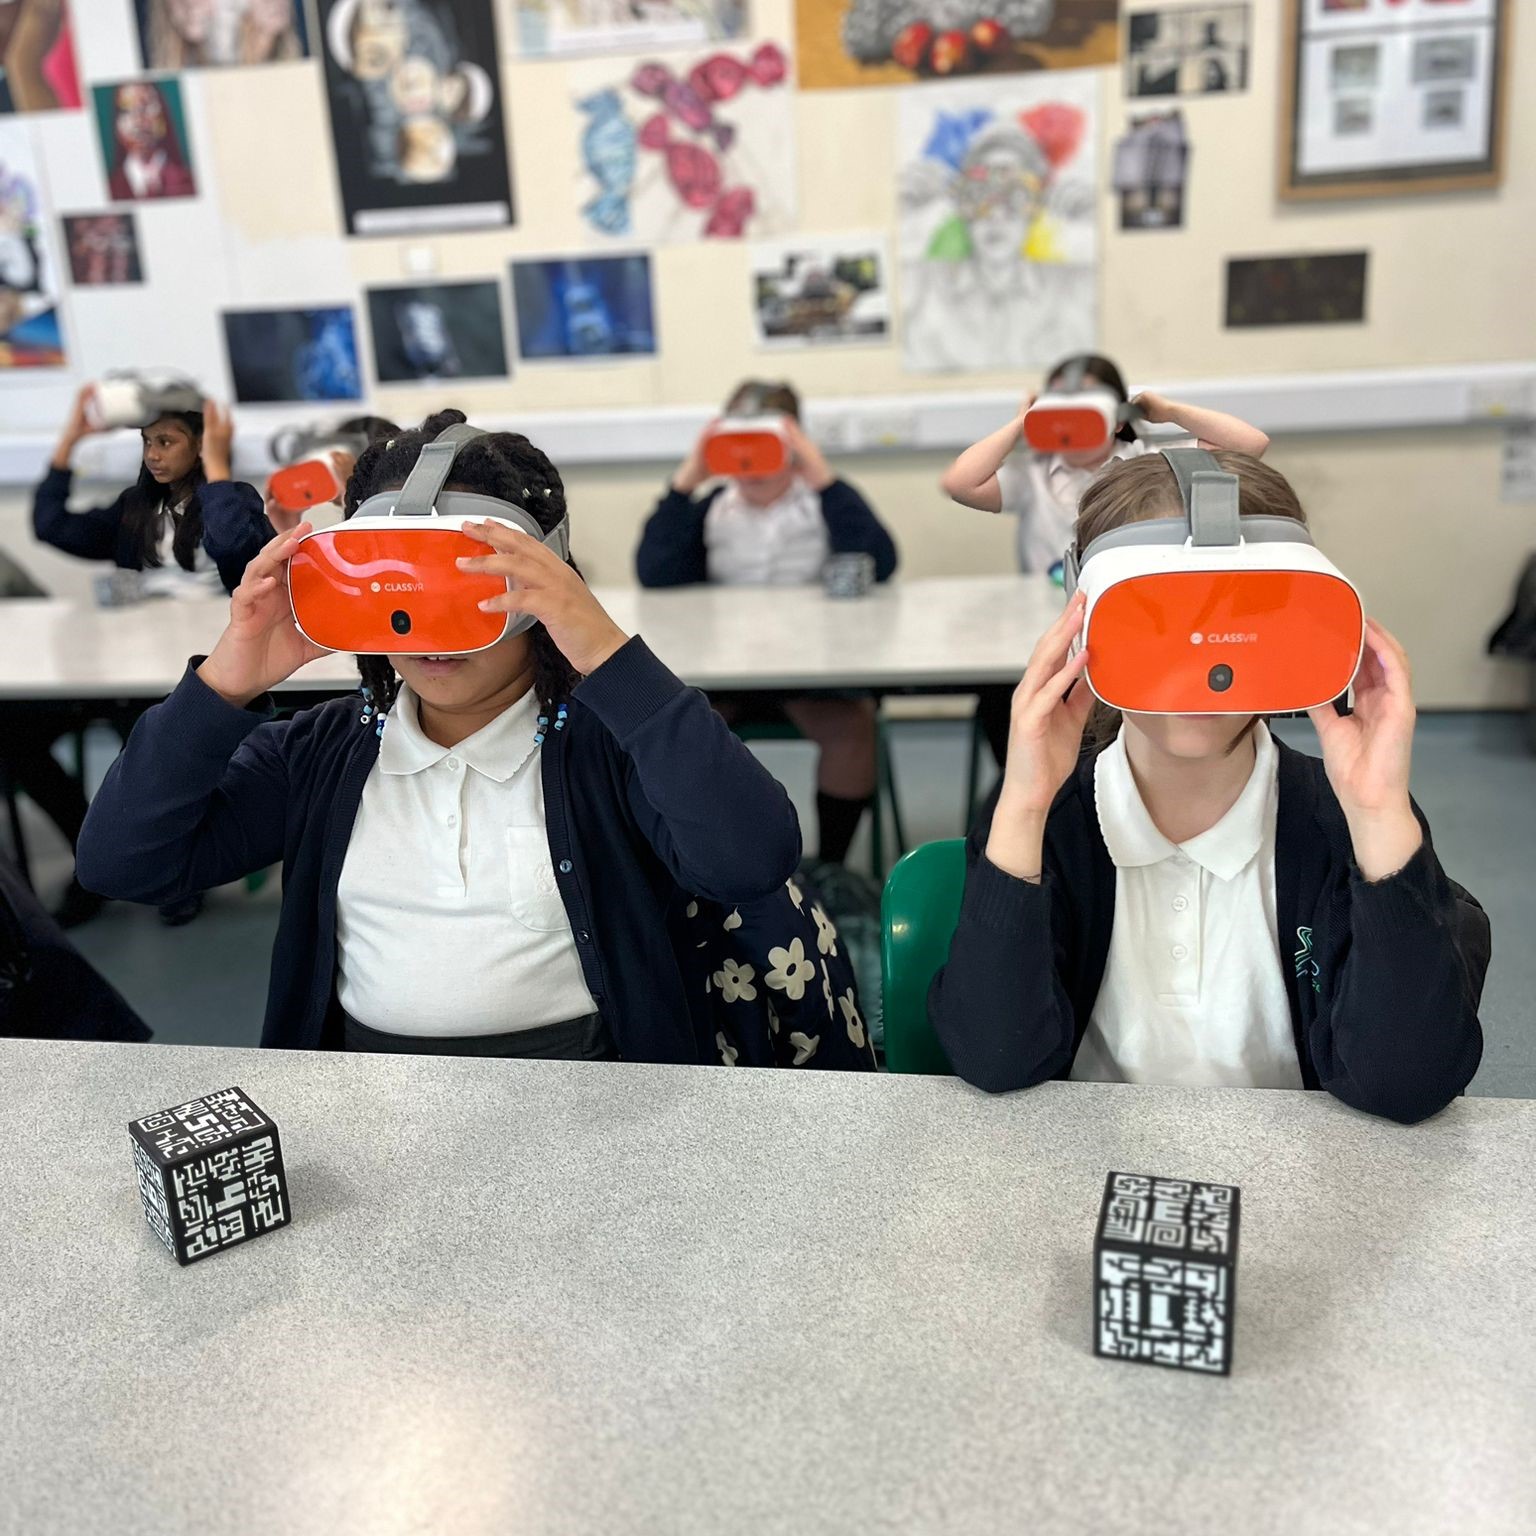 Primary School Children Using Virtual Reality Headsets